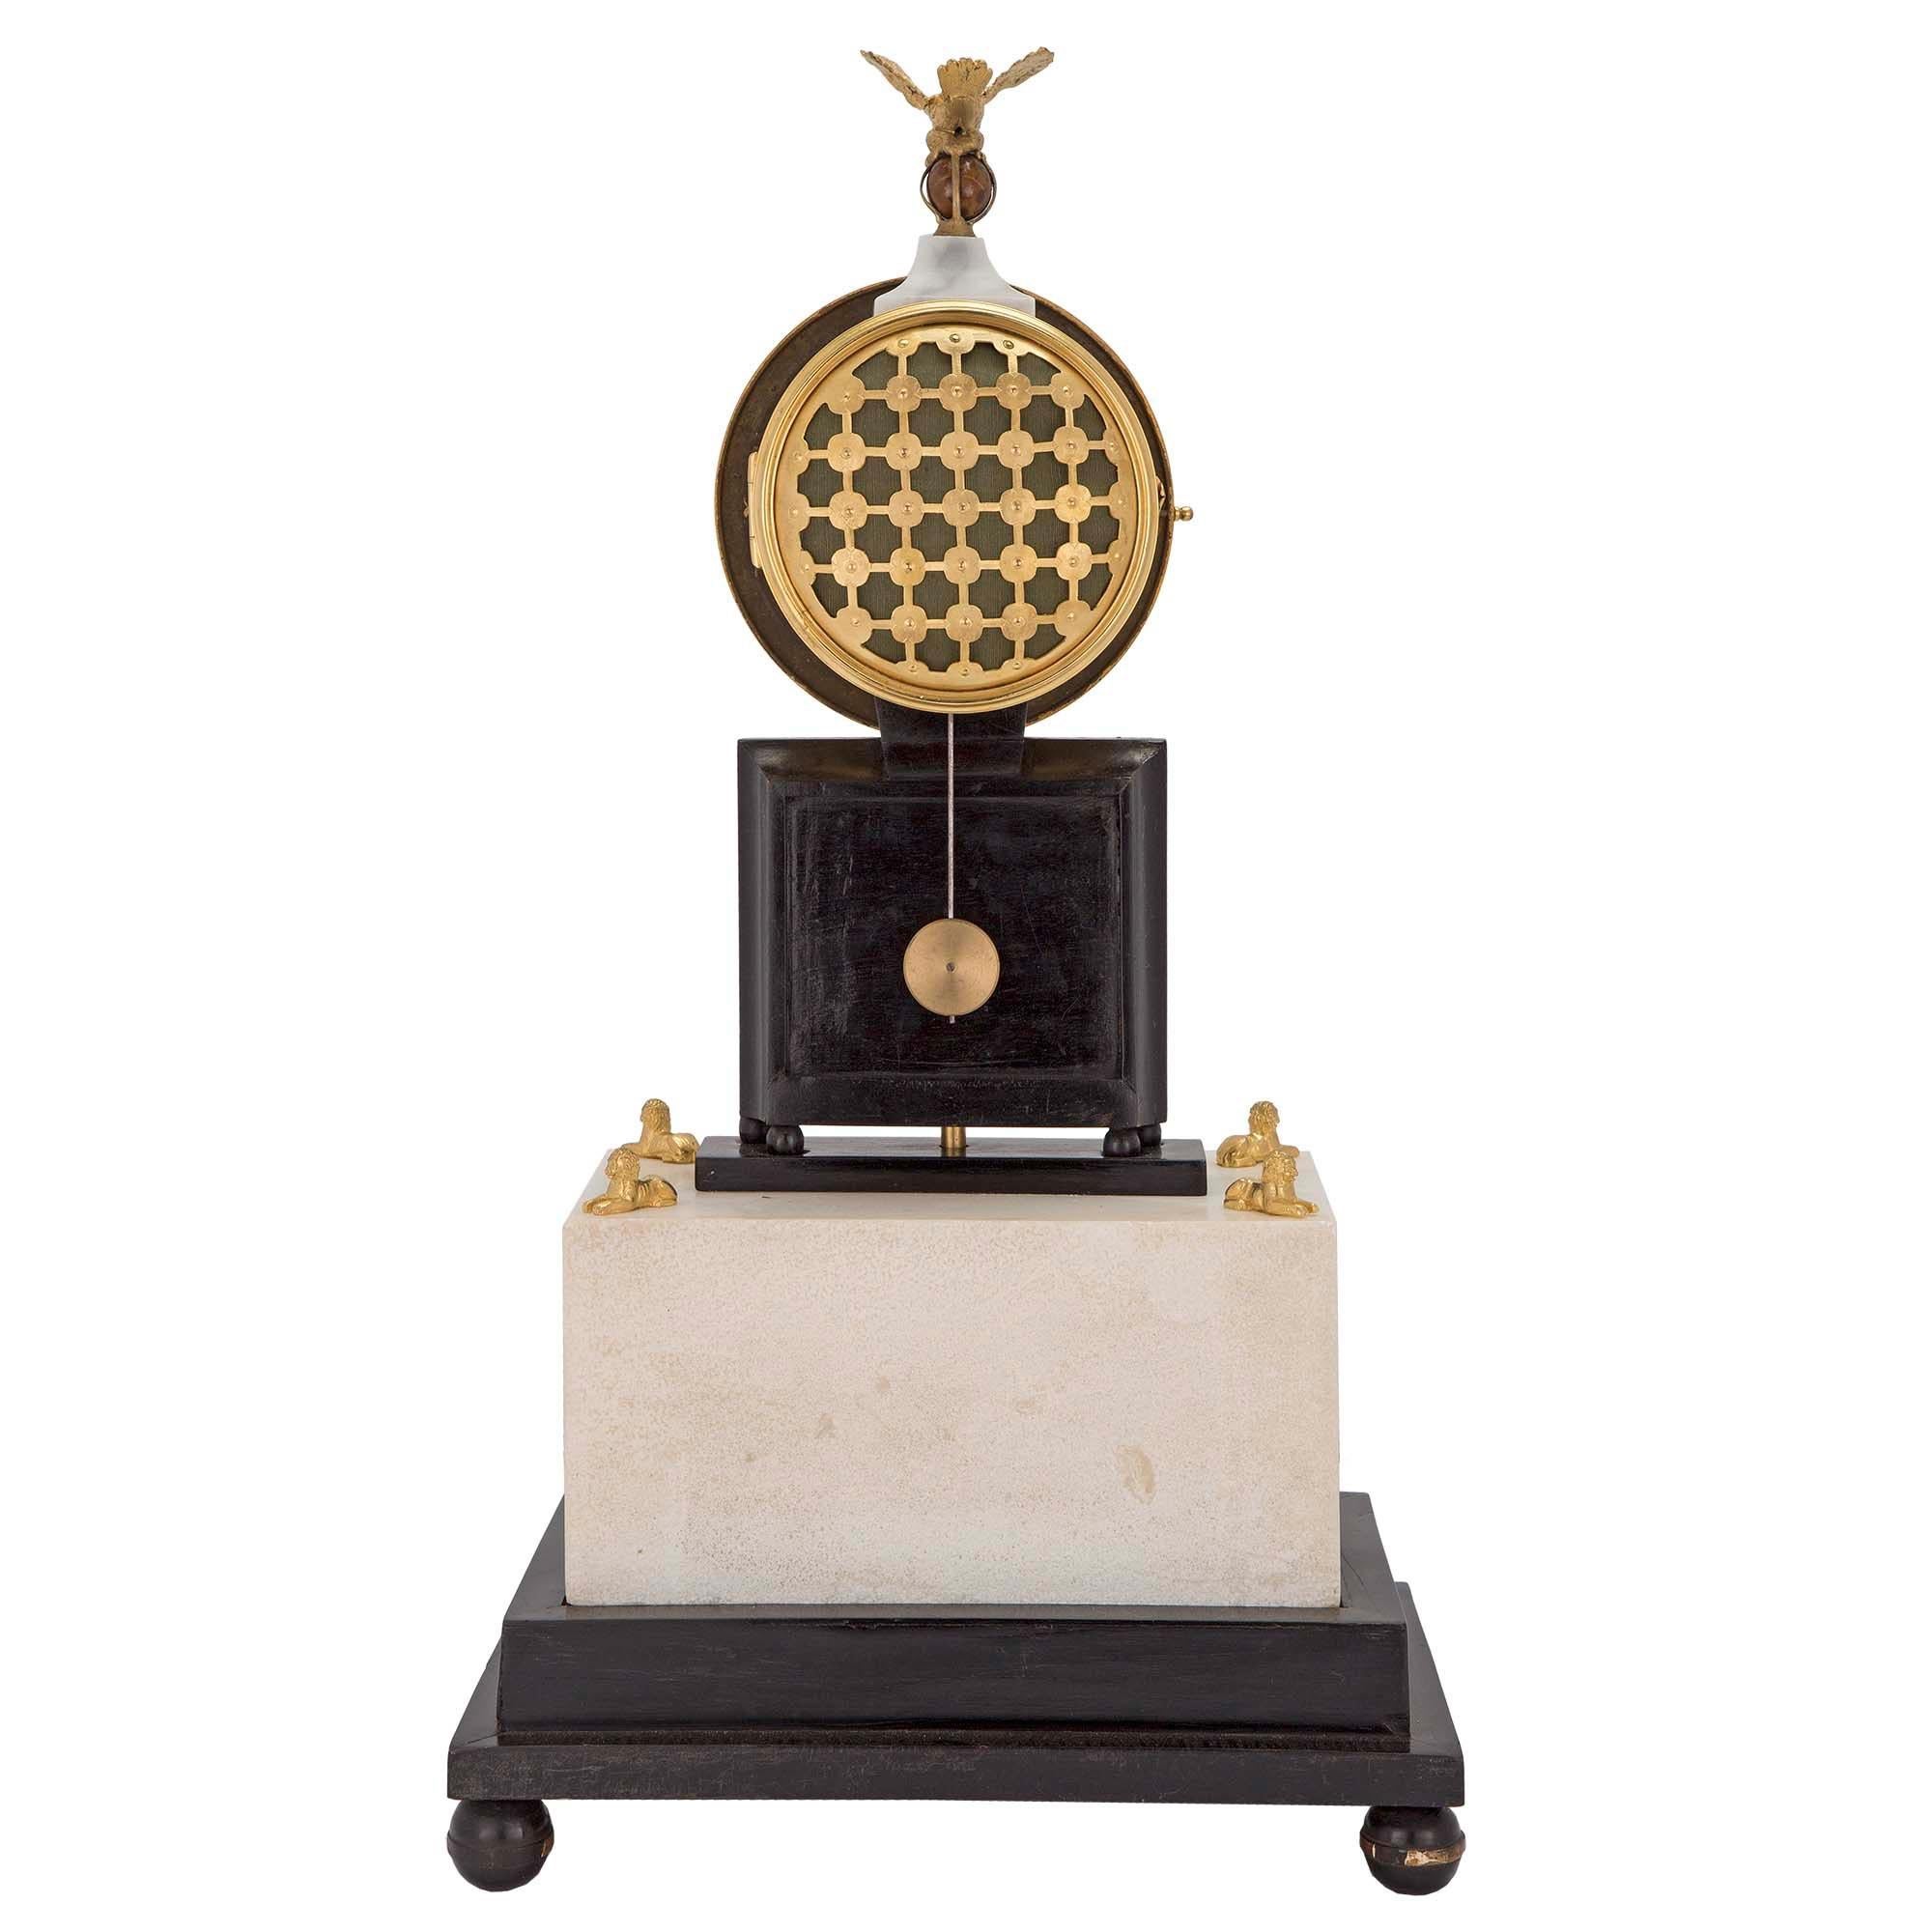 French Early 19th Century Marble and Ormolu Quarter Strike Clock with Sundial For Sale 1